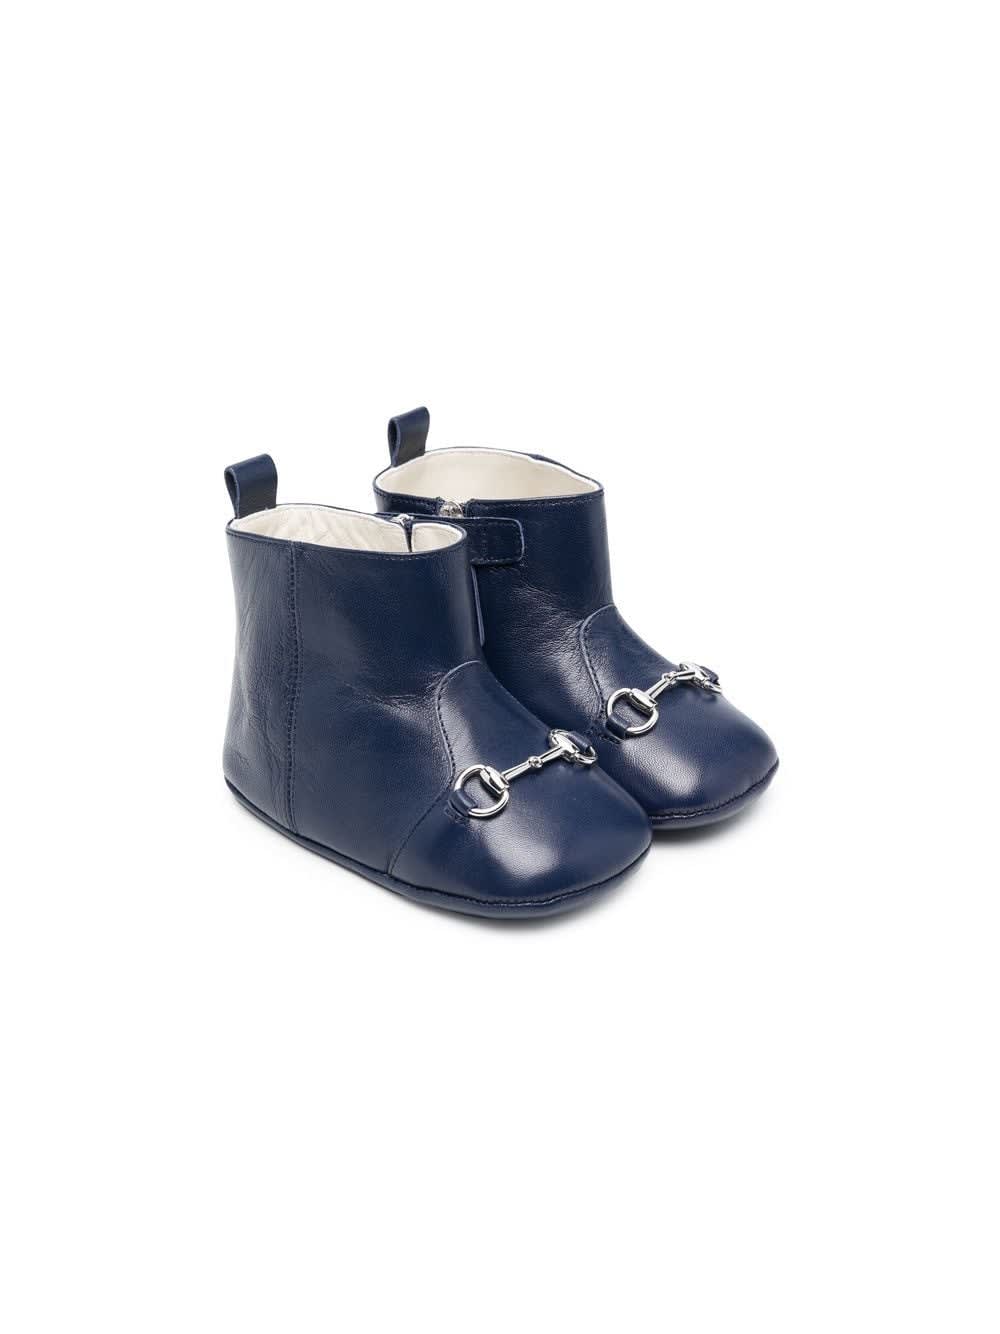 Gucci Kids' Blue Leather Ankle Boots